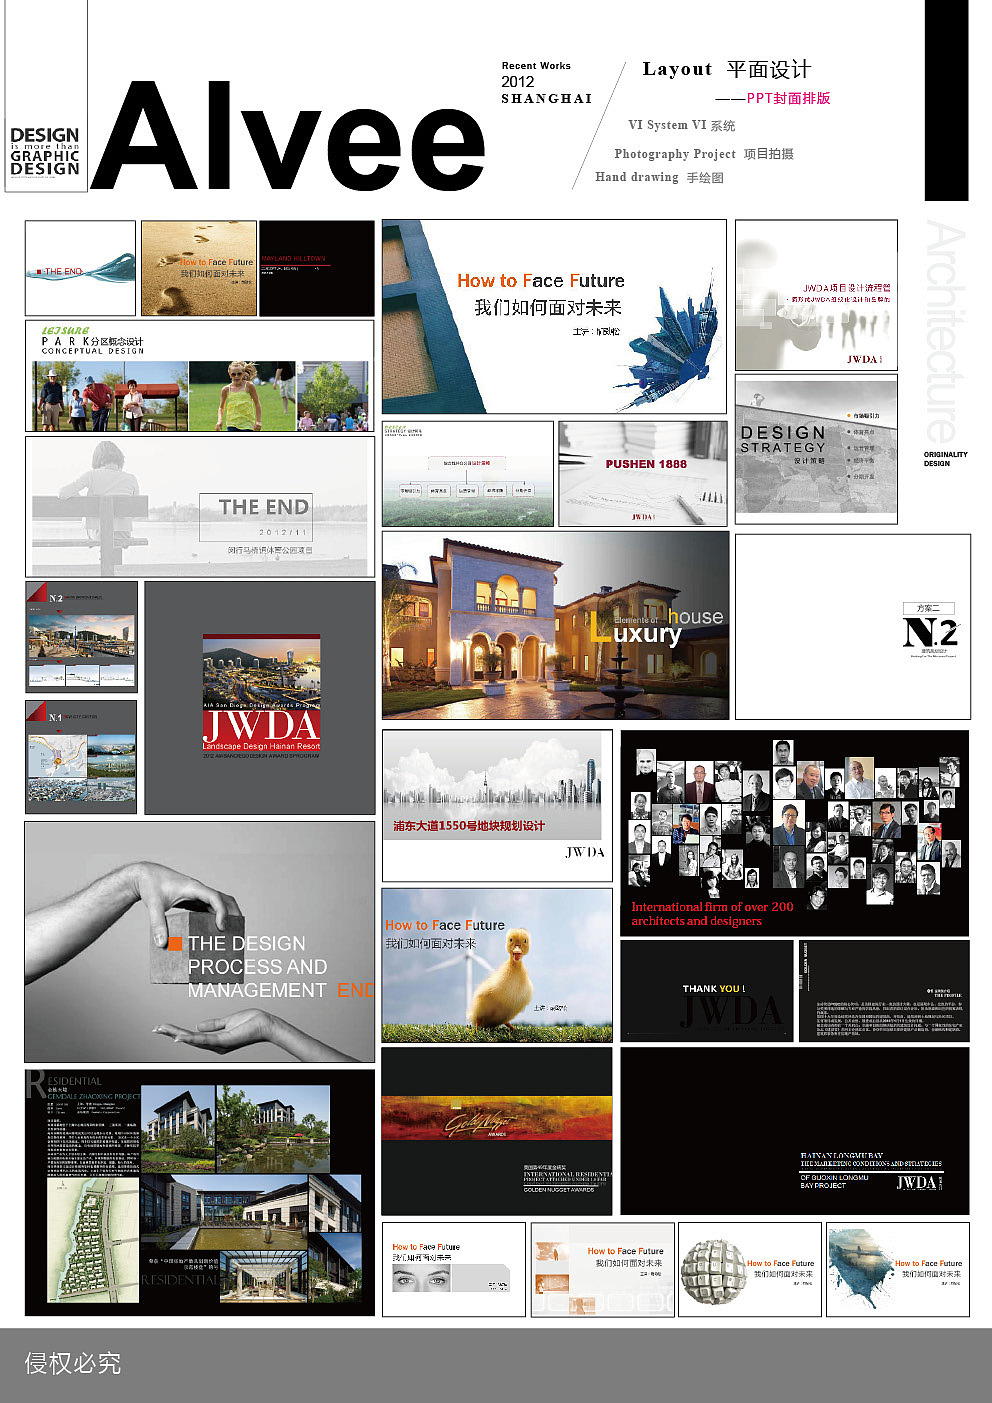 PPT cover layout design